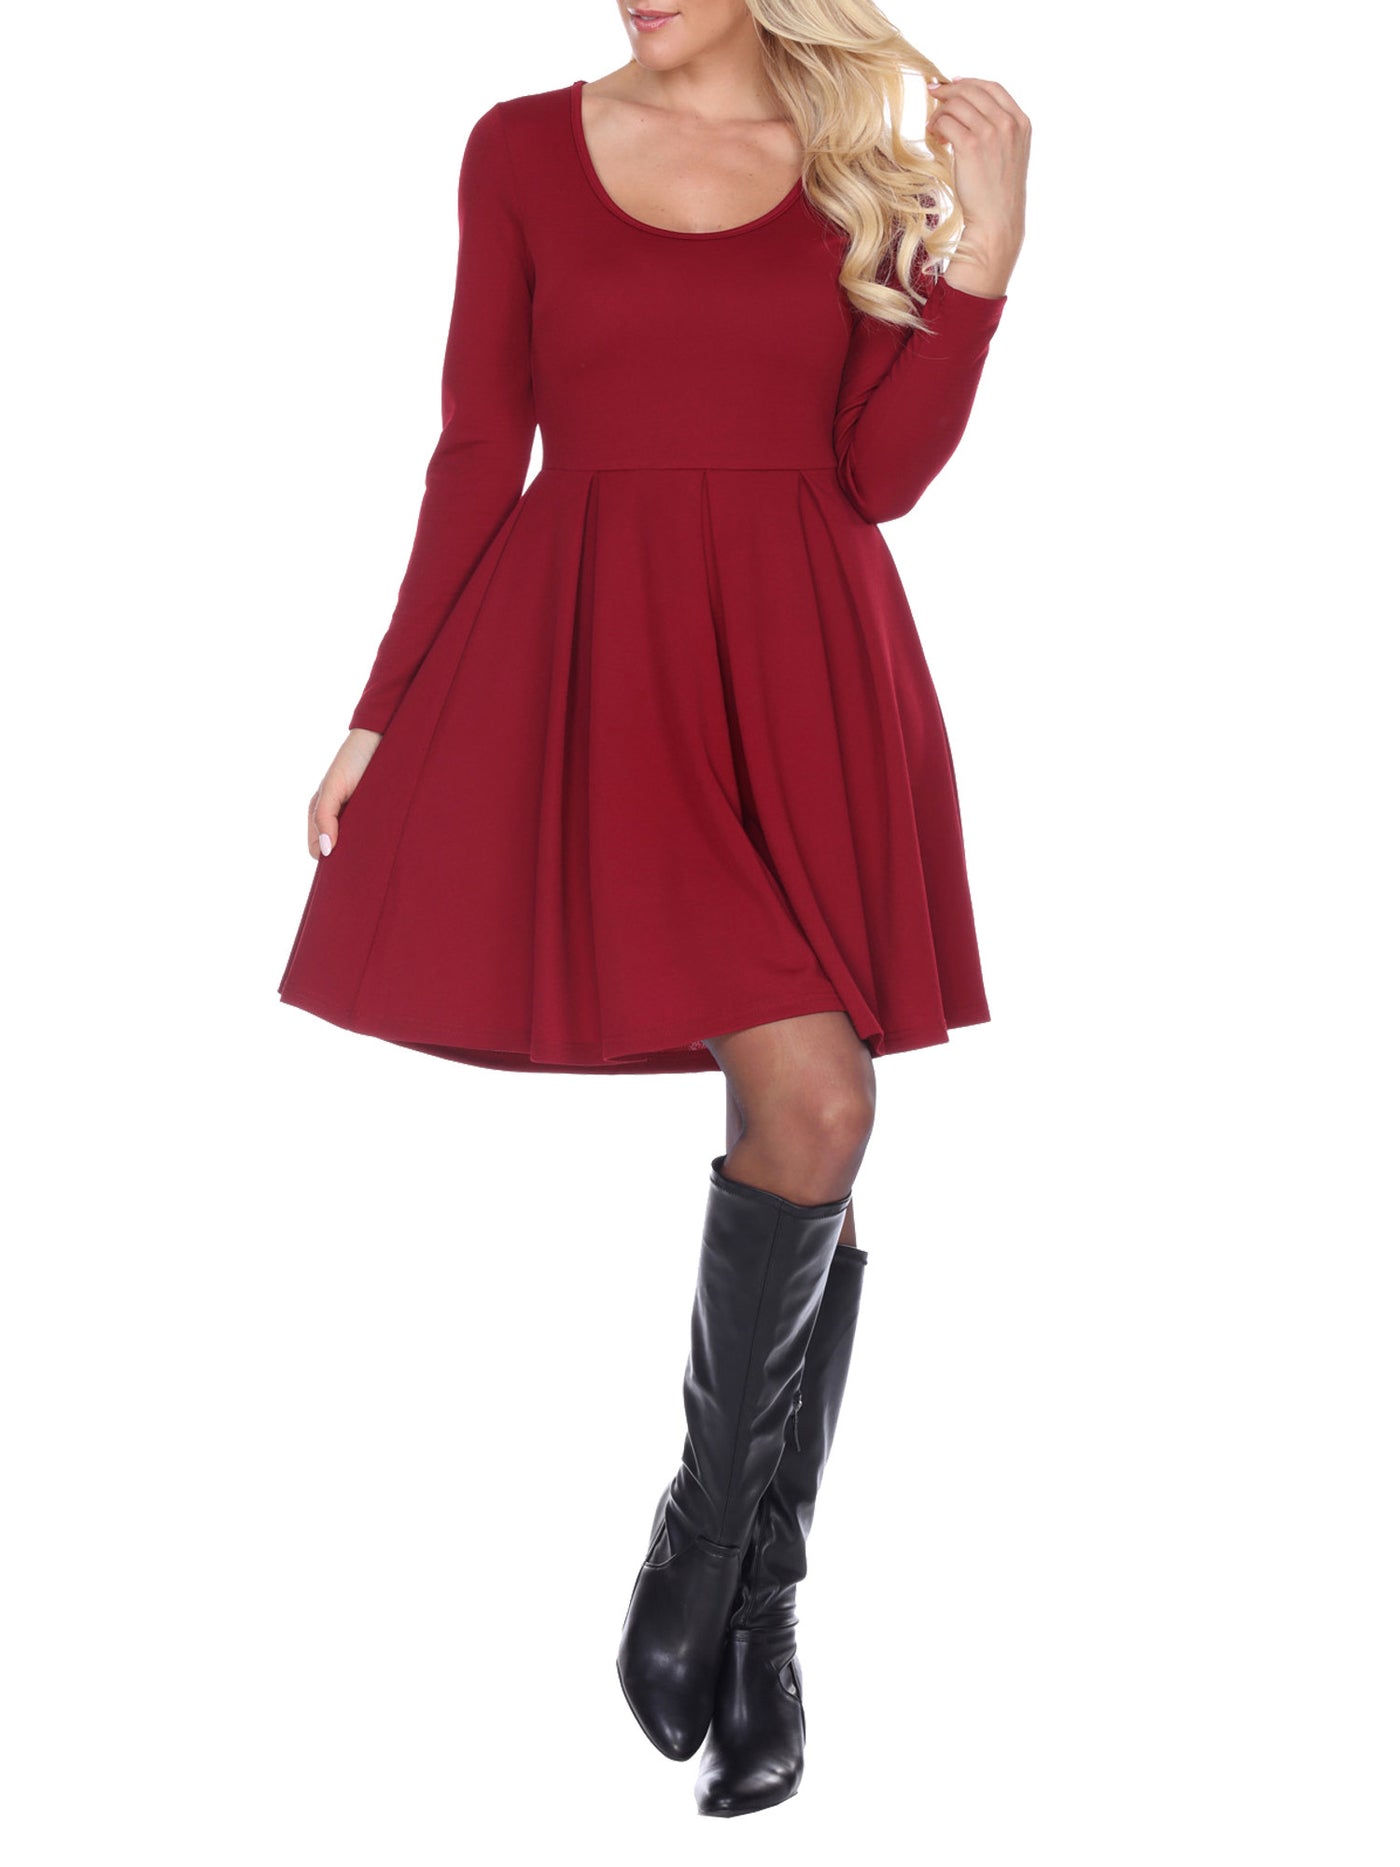 WHITE MARK Womens Burgundy Stretch Textured Pleated Long Sleeve Scoop Neck Short Fit + Flare Dress L